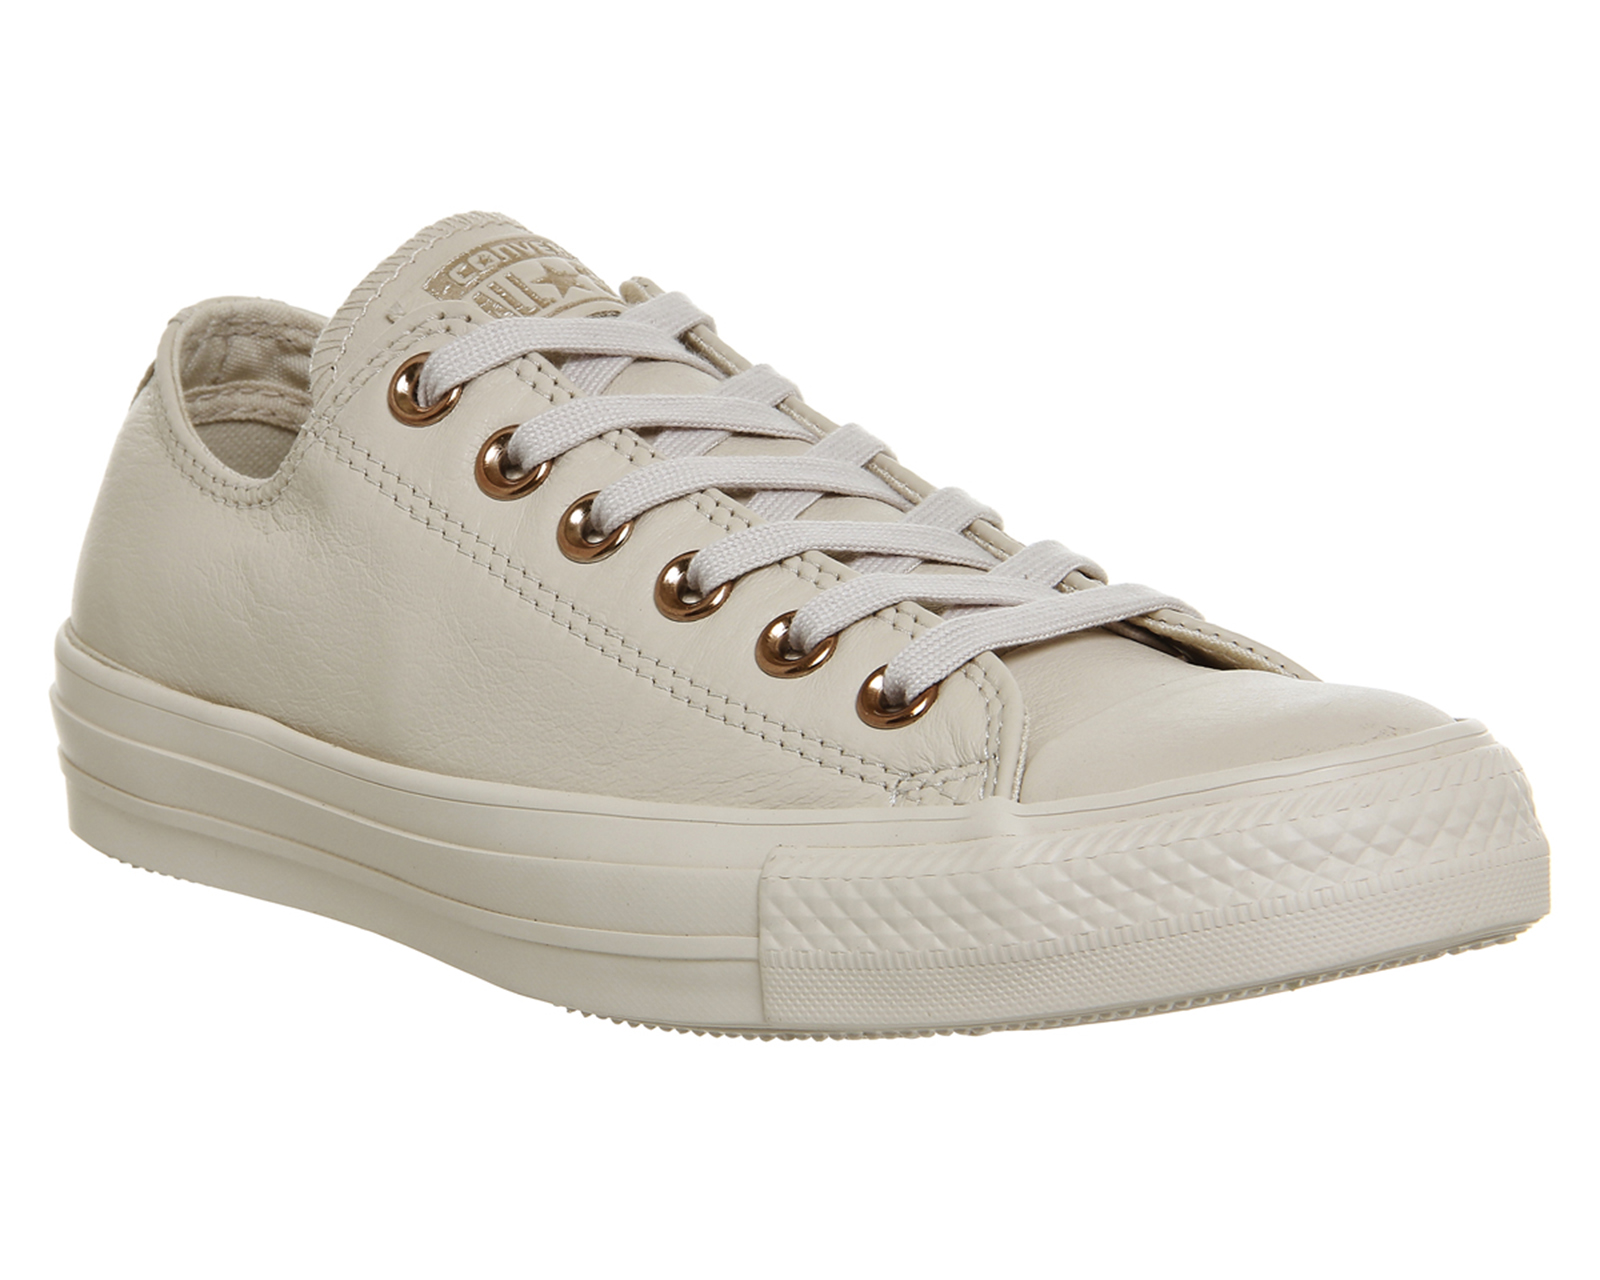 converse all star low leather desert sand light gold